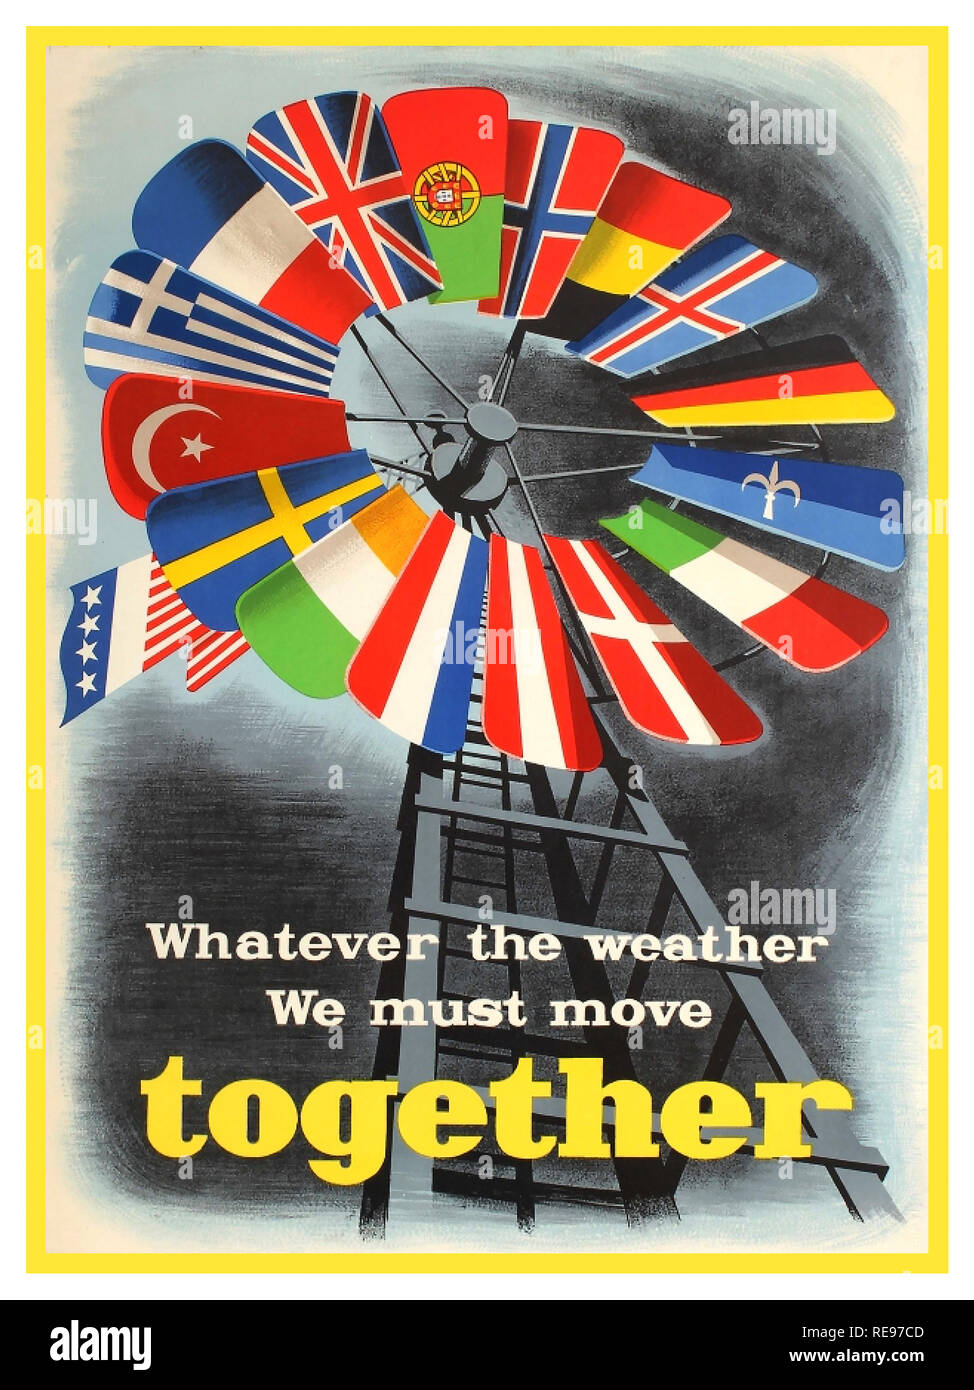 Marshall Plan Vintage propaganda poster for the post-war US sponsored European Recovery Program (1948) known as the Marshall plan - ‘Whatever the weather we must move together.’ Artwork design against a grey shaded background by I. Spreekmeester depicting a windmill with blades representing the flags of countries participating in the Marshall Plan with the American flag at the helm of the mill. This design received a Prize in the Intra-European Cooperation for a Better Standard of Living poster competition on the theme of cooperation and economic recovery held in post war Europe Stock Photo